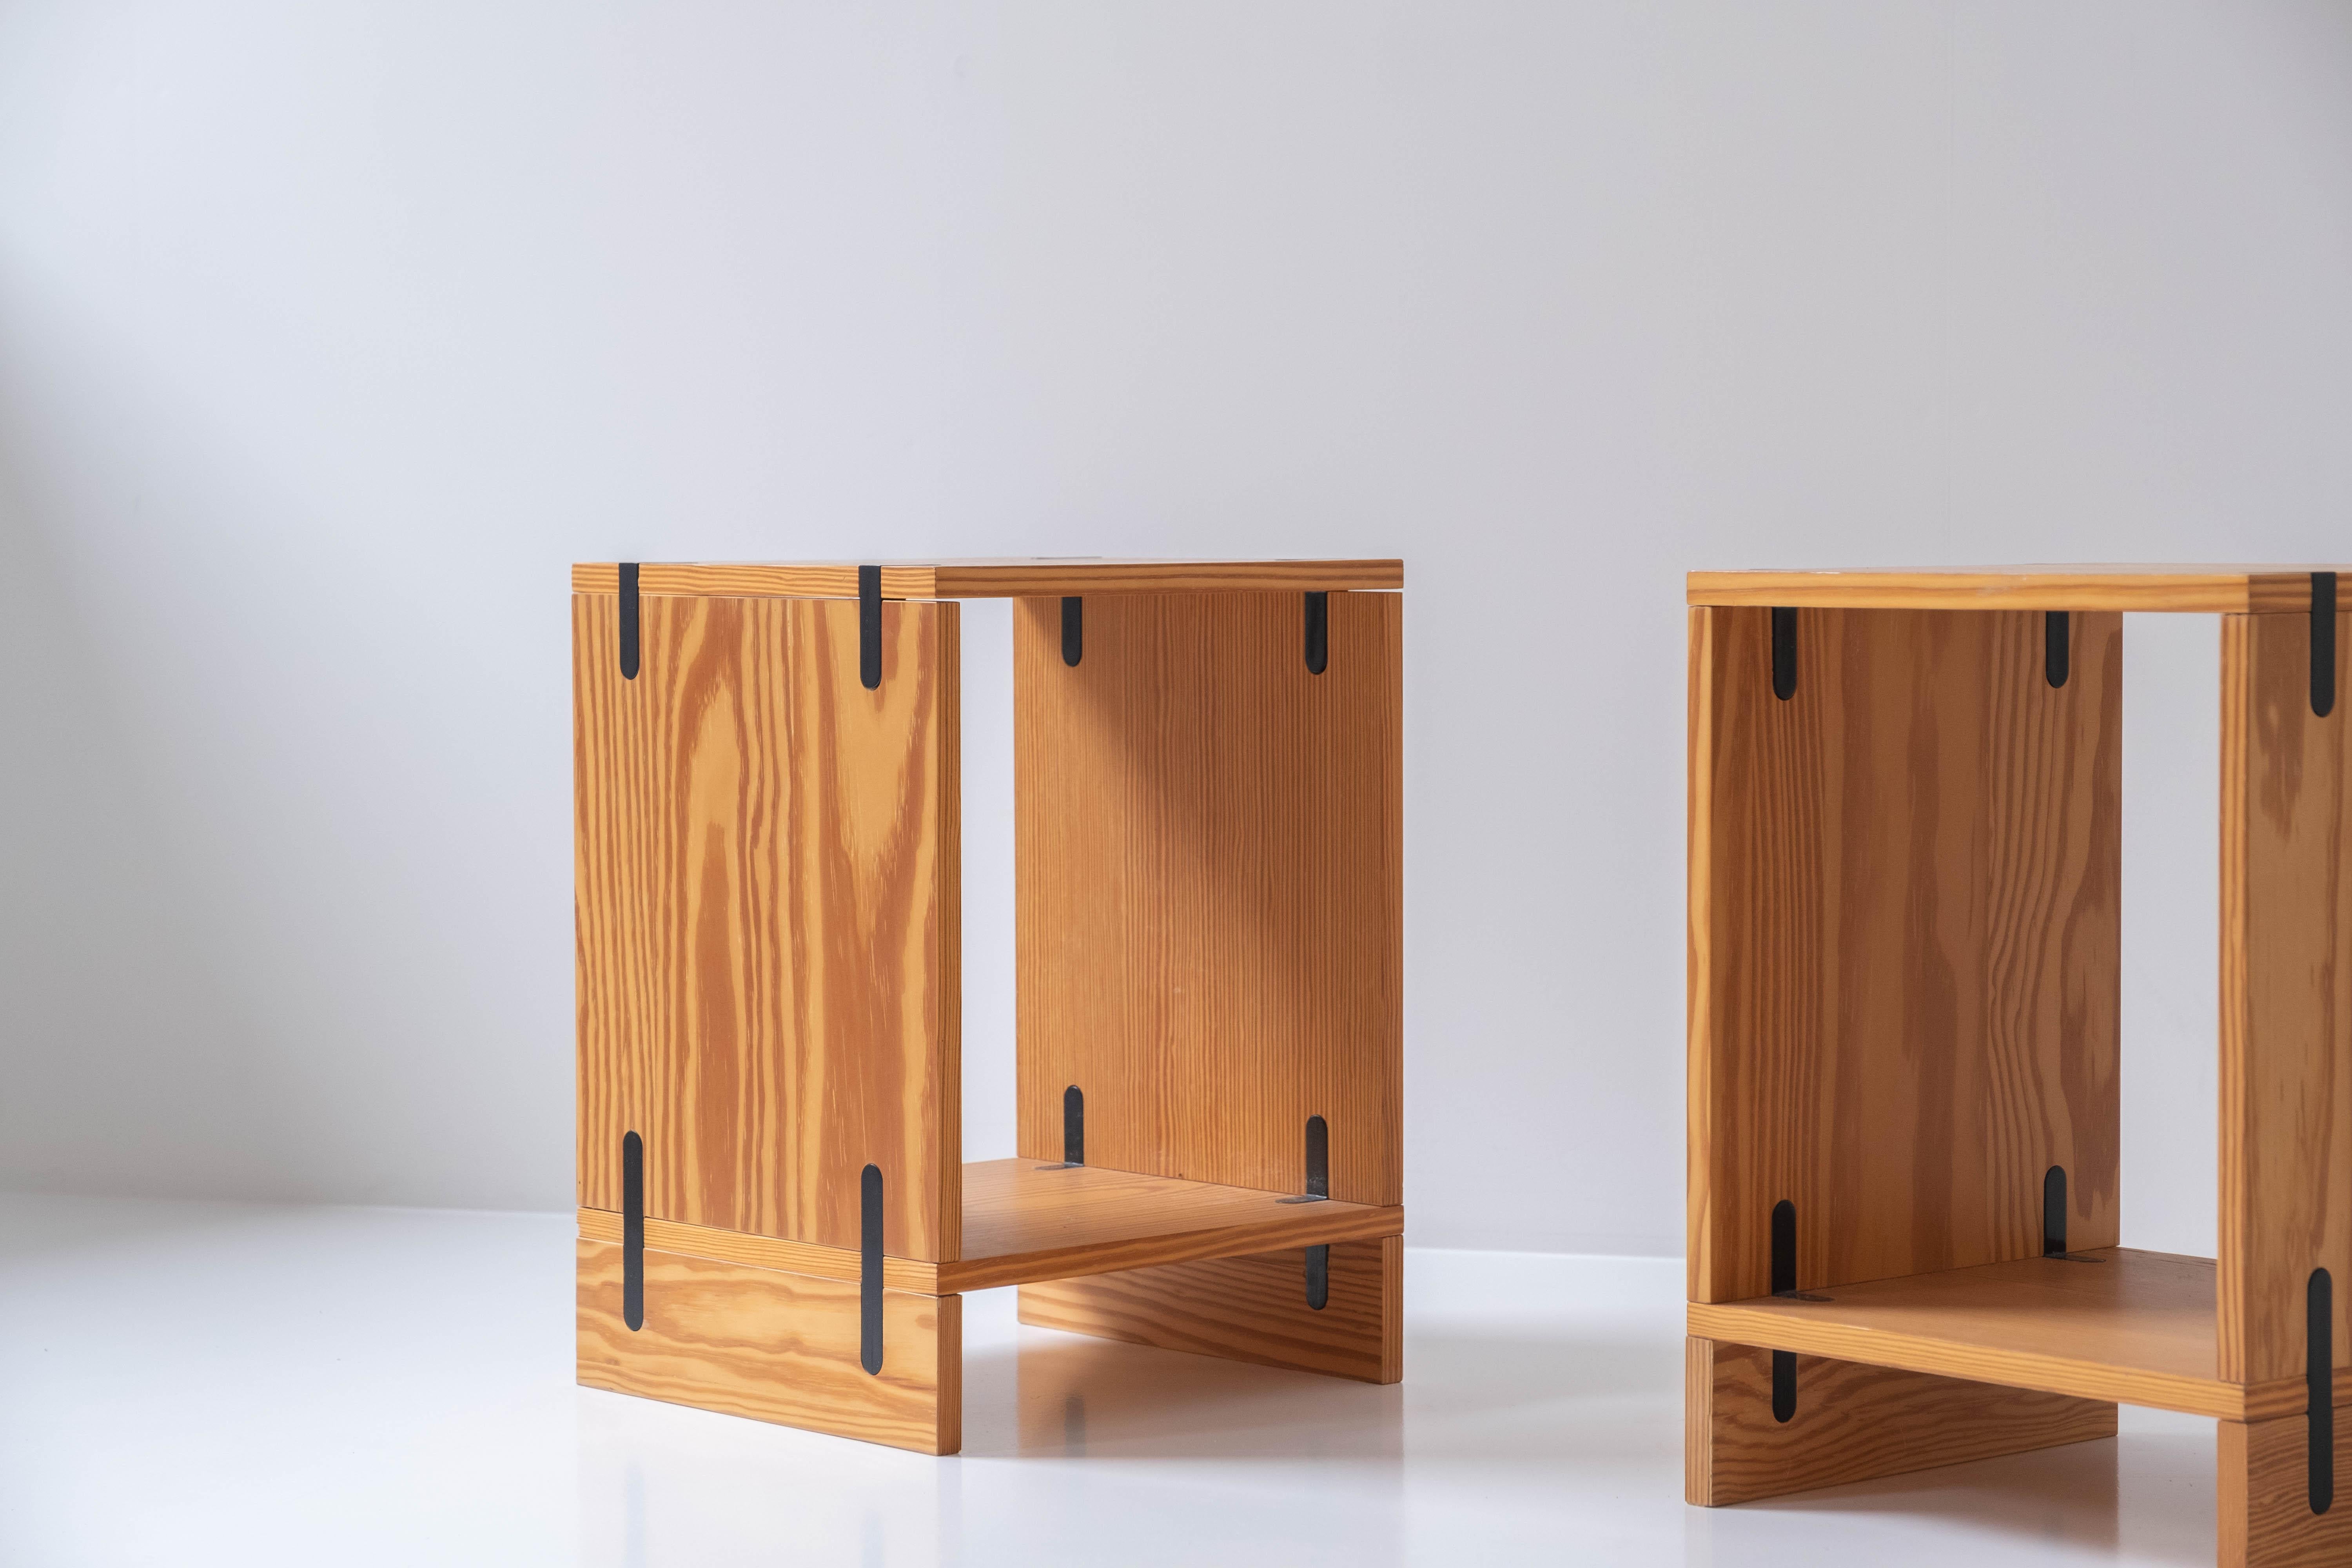 Set of 2 ‘Cubex’ side tables by Poul Cadovius for Cado, Denmark 1960s. These tables are made out of Oregon pine and features black lacquered joints. Both re in a very well presented and original condition. Would be lovely as bedside tables too!